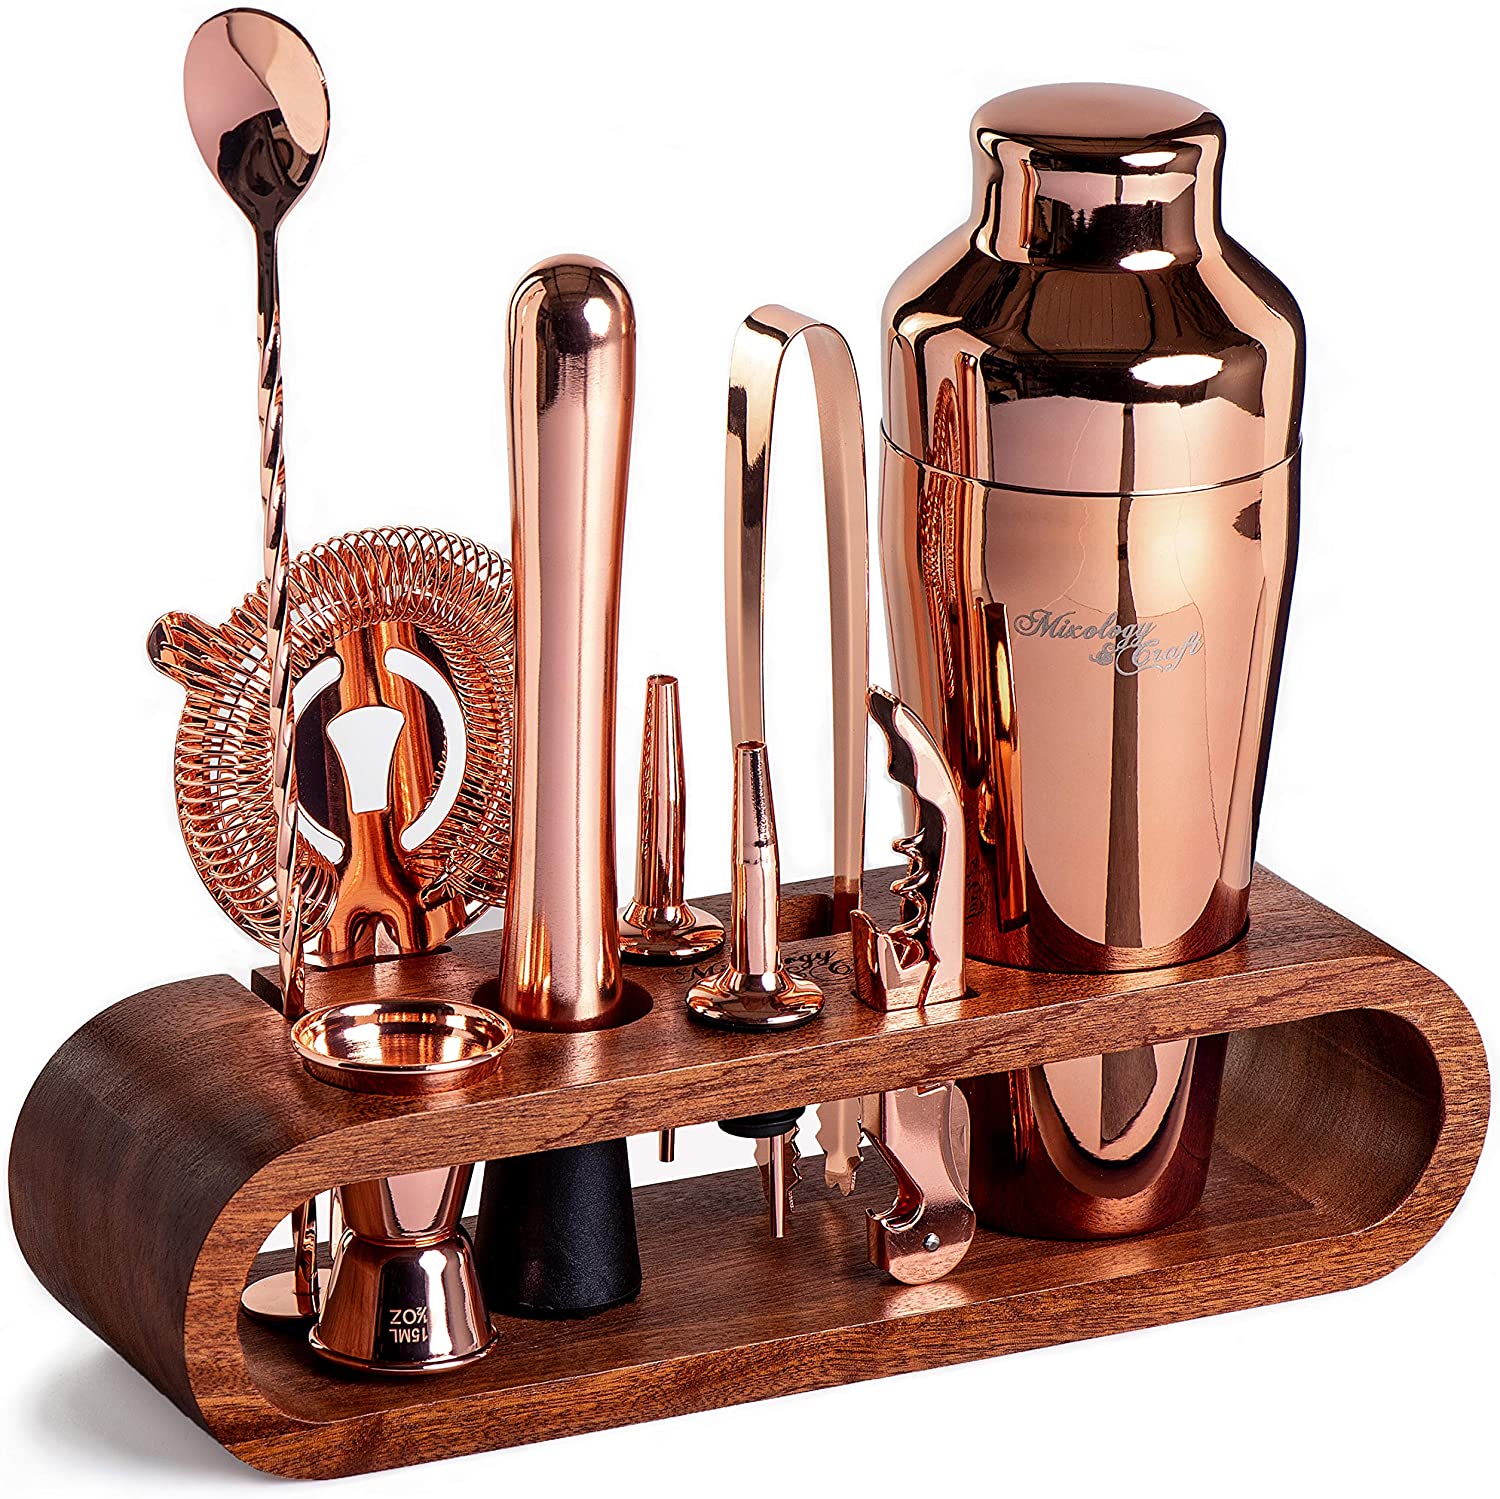 Mixology Bartender Kit: 10-Piece Copper Bar Set Cocktail Shaker Set with Stylish Mahogany Stand | Perfect Home Bartending Kit with Rose Gold Bar Tools and Martini Shaker for Foolproof Drink Mixing